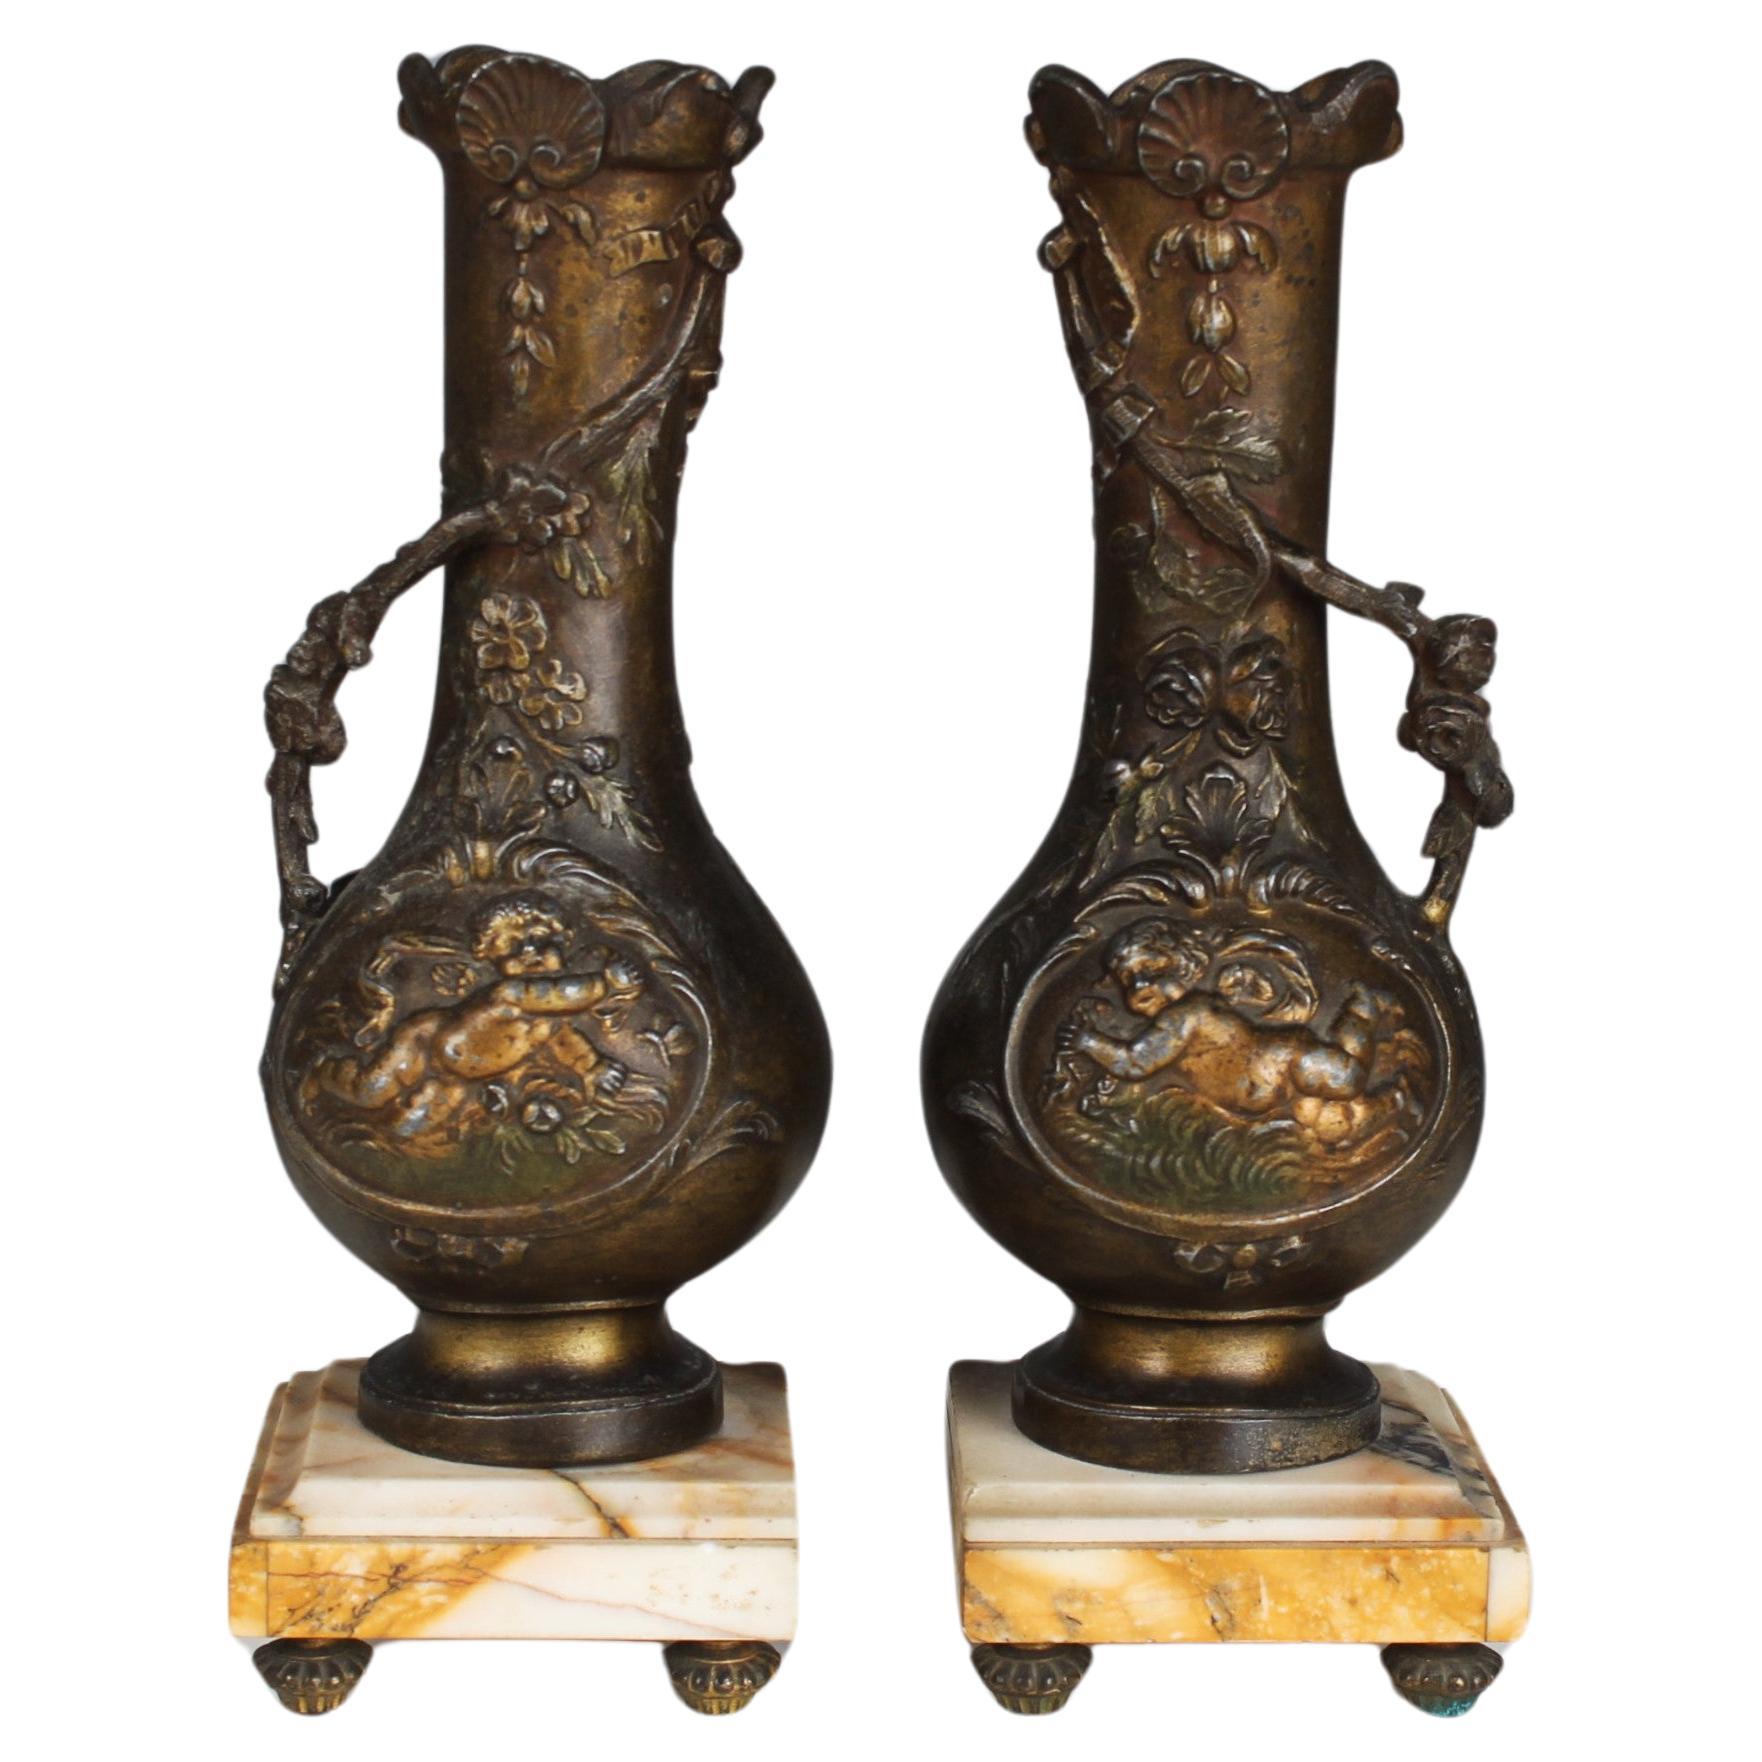 Antique Pair of Vases On A Marble Base, France, 1900s